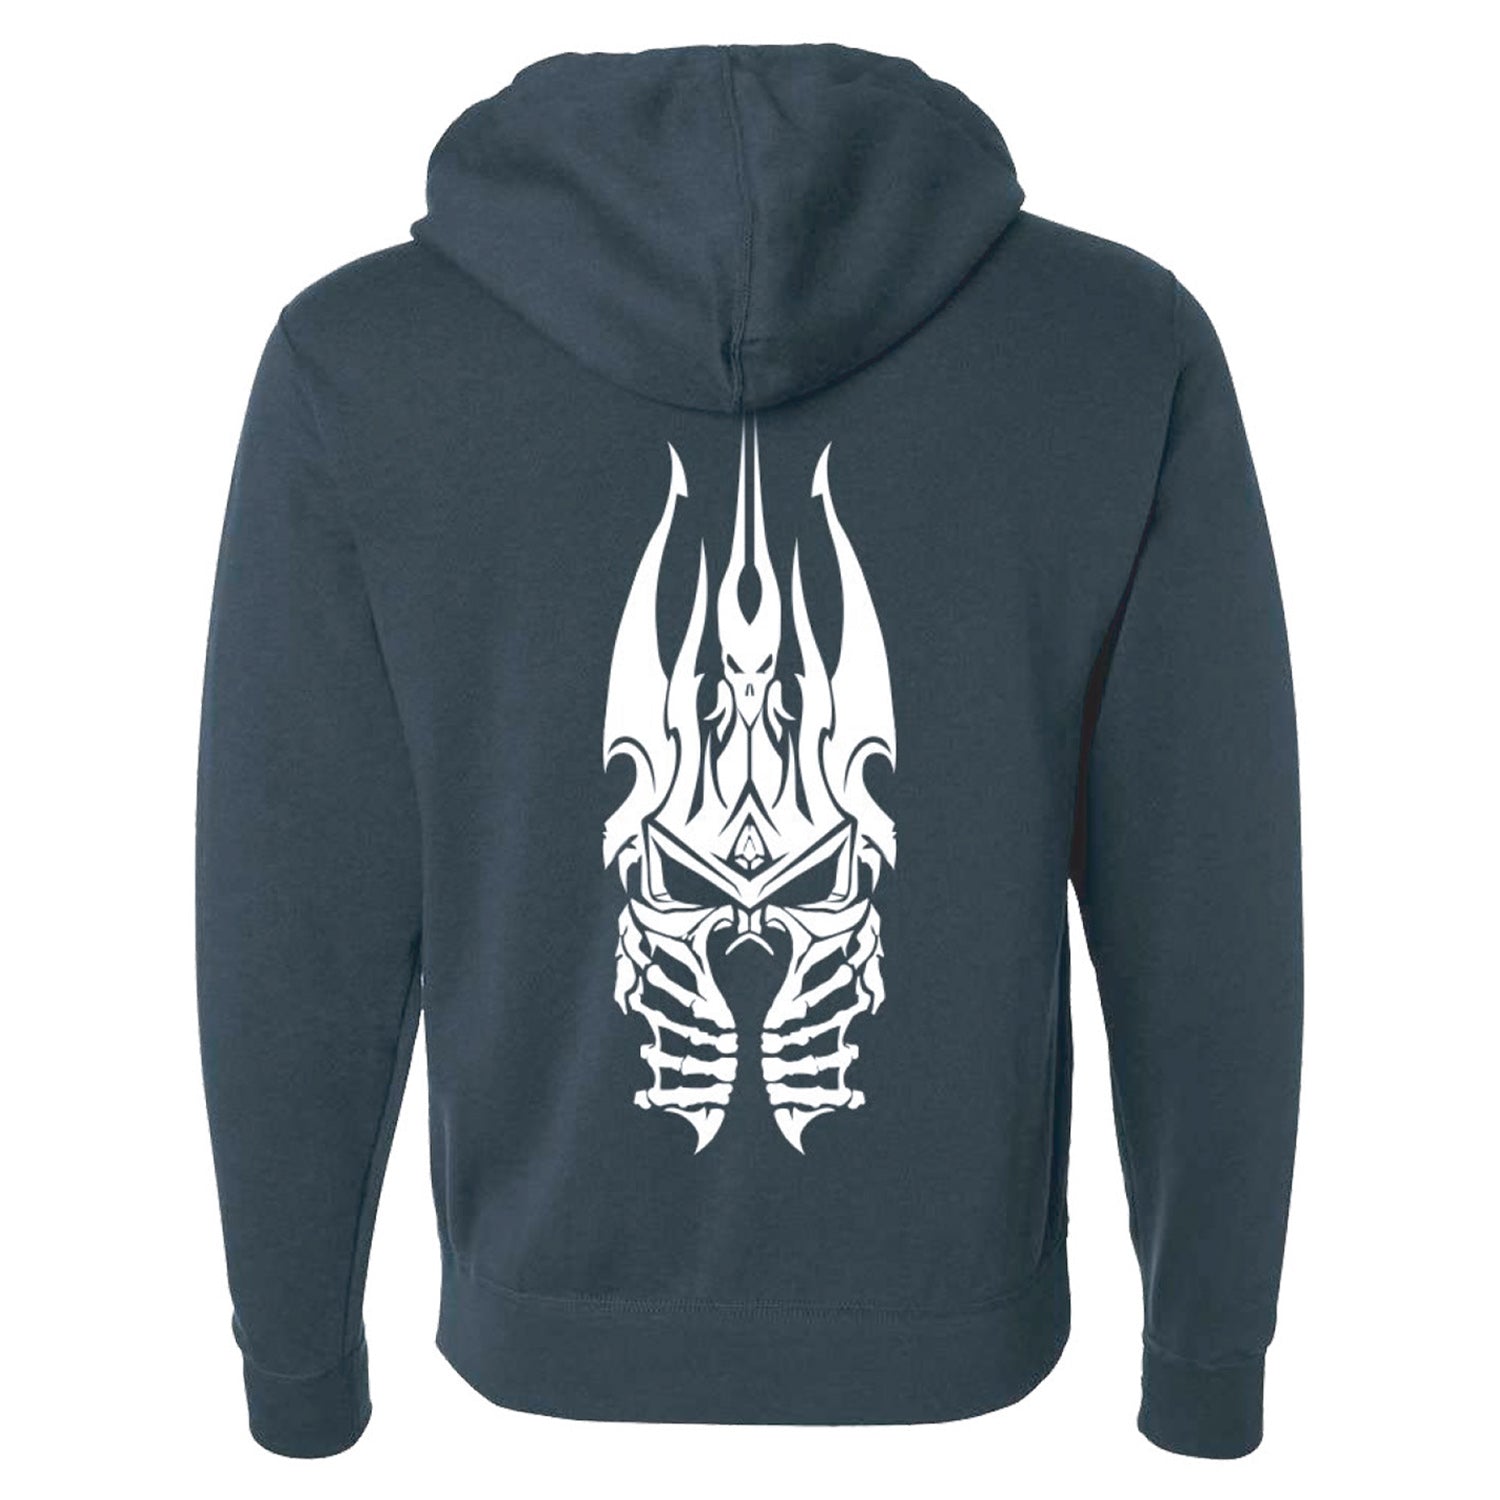 World of Warcraft Wrath of the Lich King Helm Hoodie - Back View Navy Version